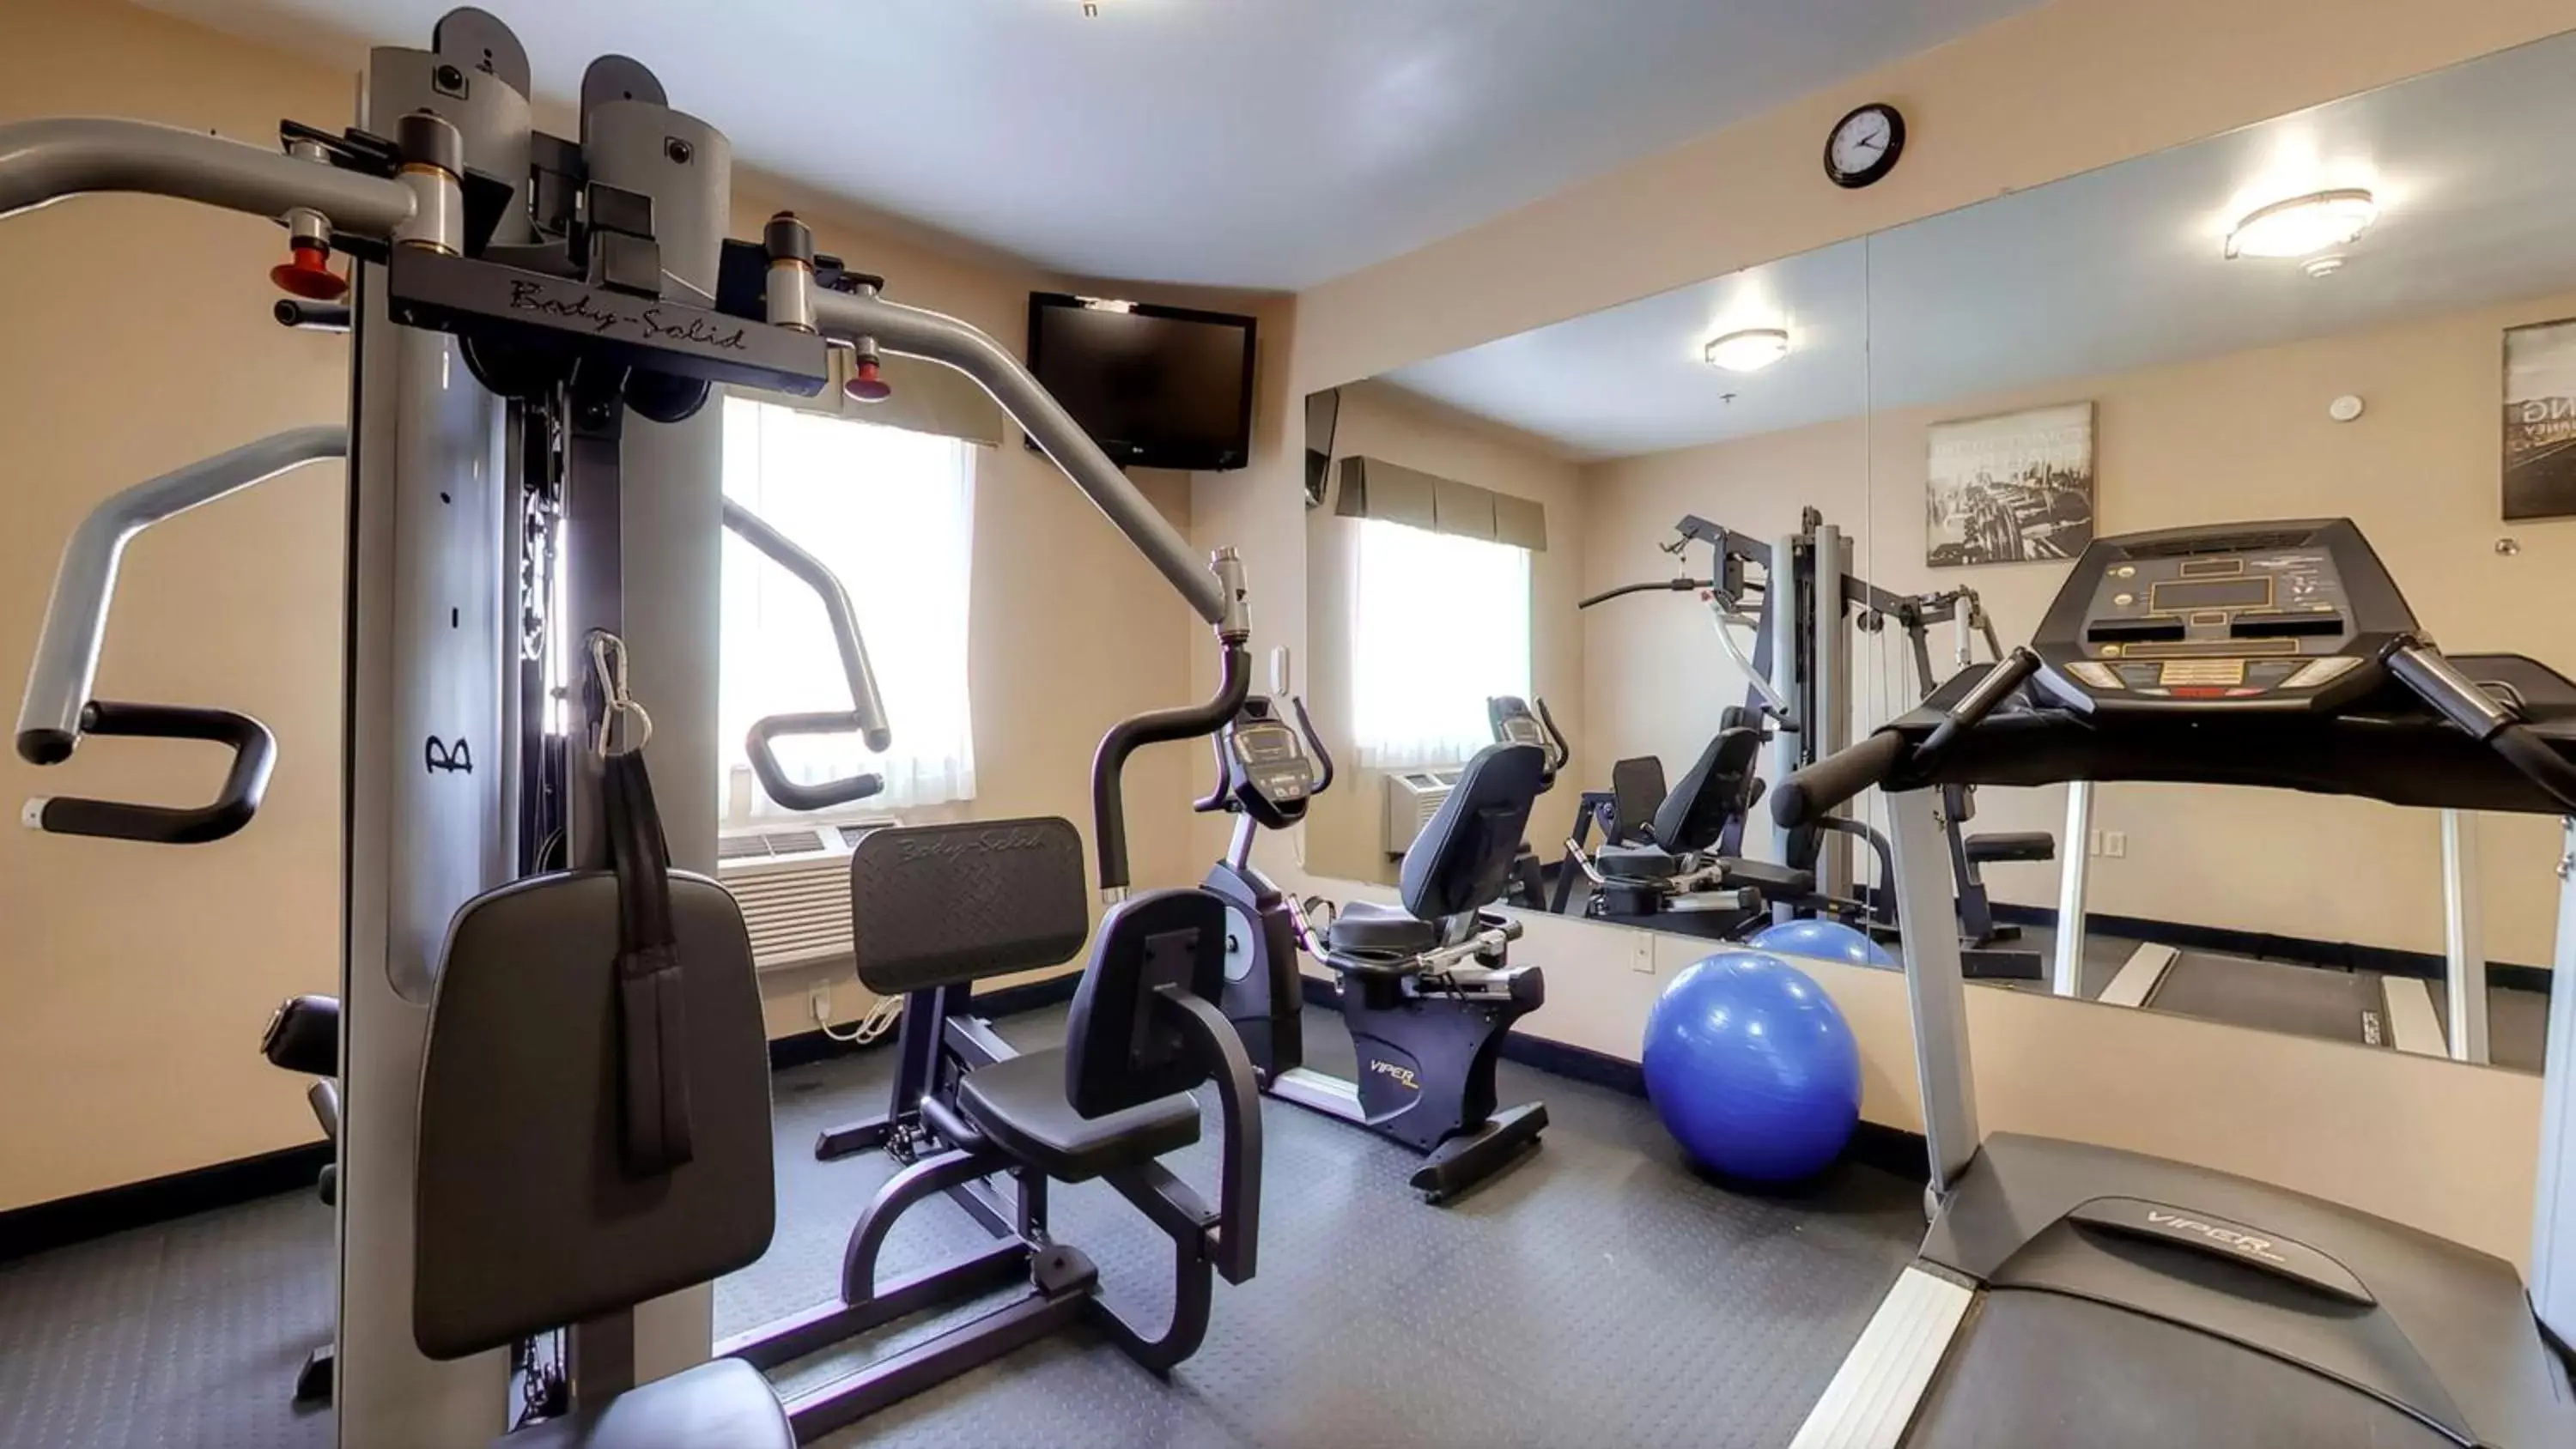 Fitness centre/facilities, Fitness Center/Facilities in Best Western PLUS University Inn Marion